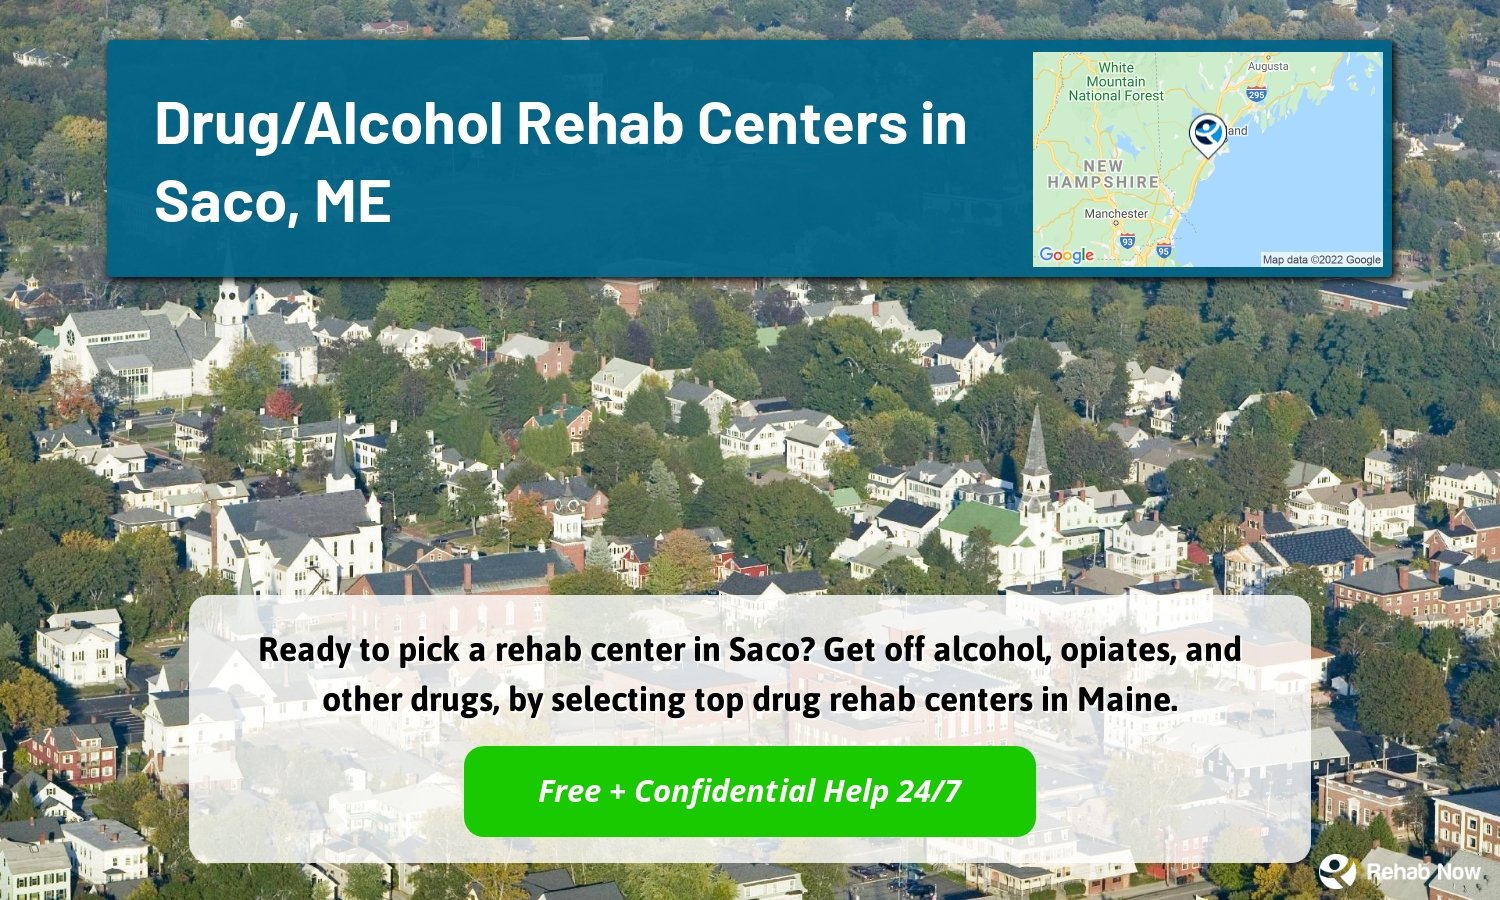 Ready to pick a rehab center in Saco? Get off alcohol, opiates, and other drugs, by selecting top drug rehab centers in Maine.